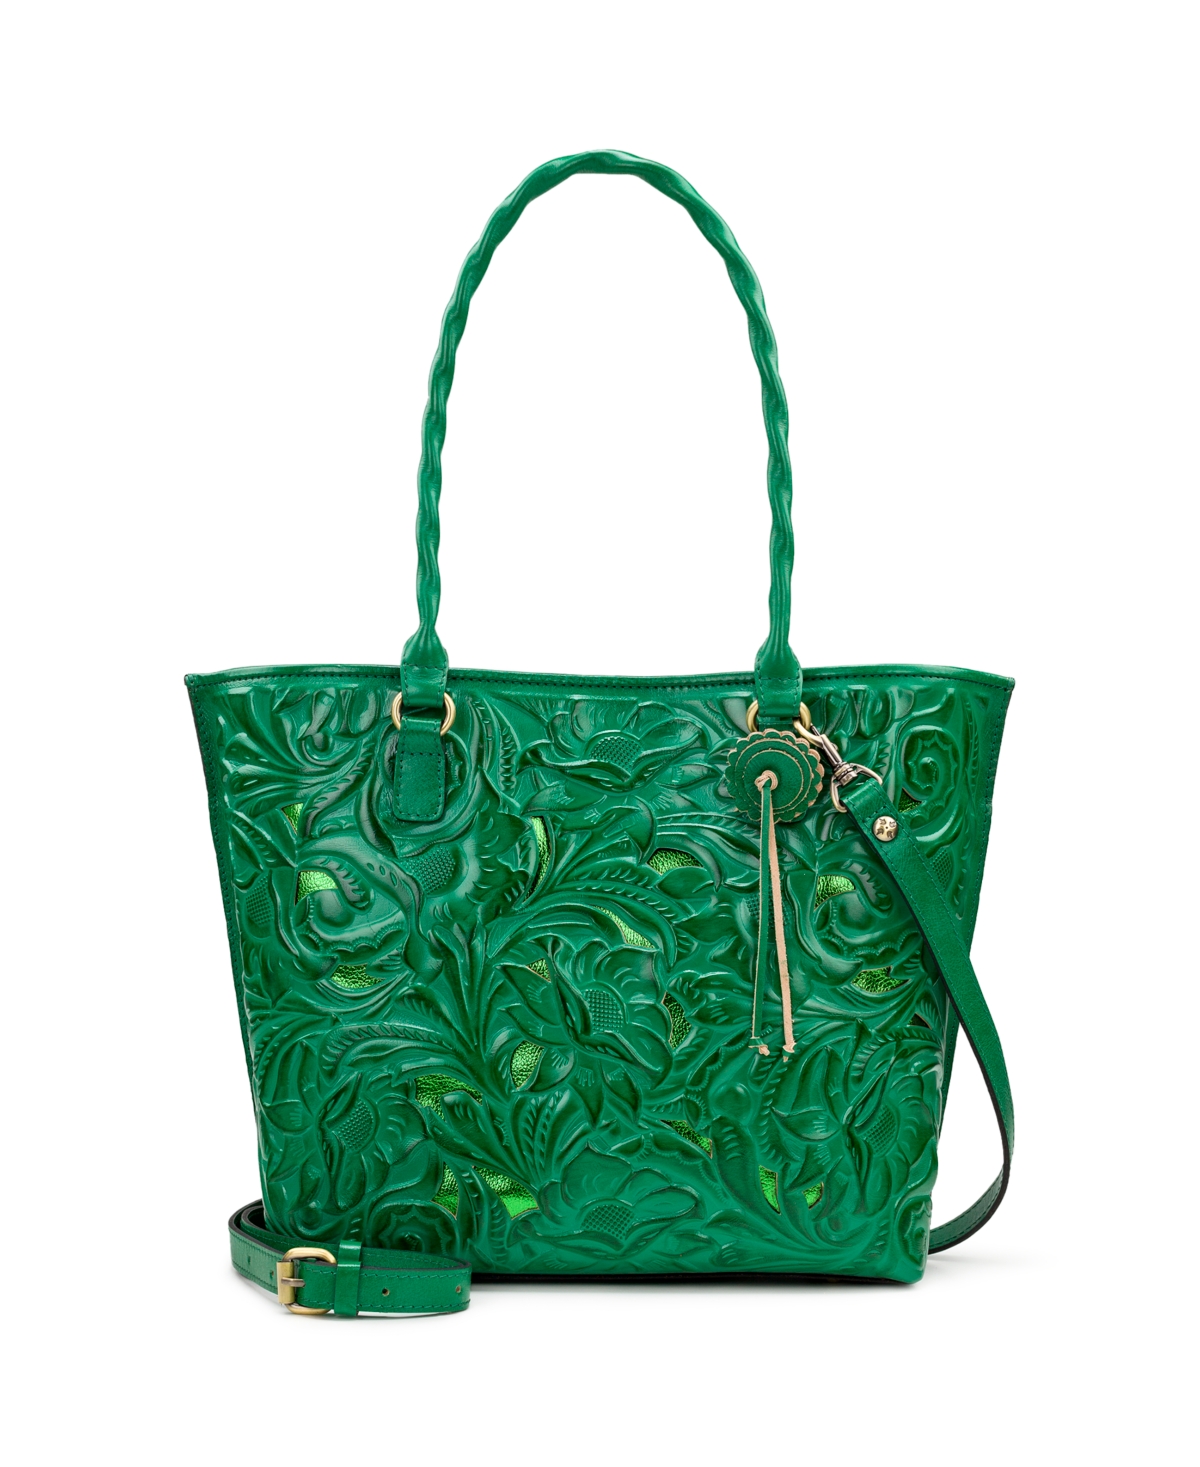 Patricia Nash Women's Adeline Extra Large Tote Bag In Soft Green